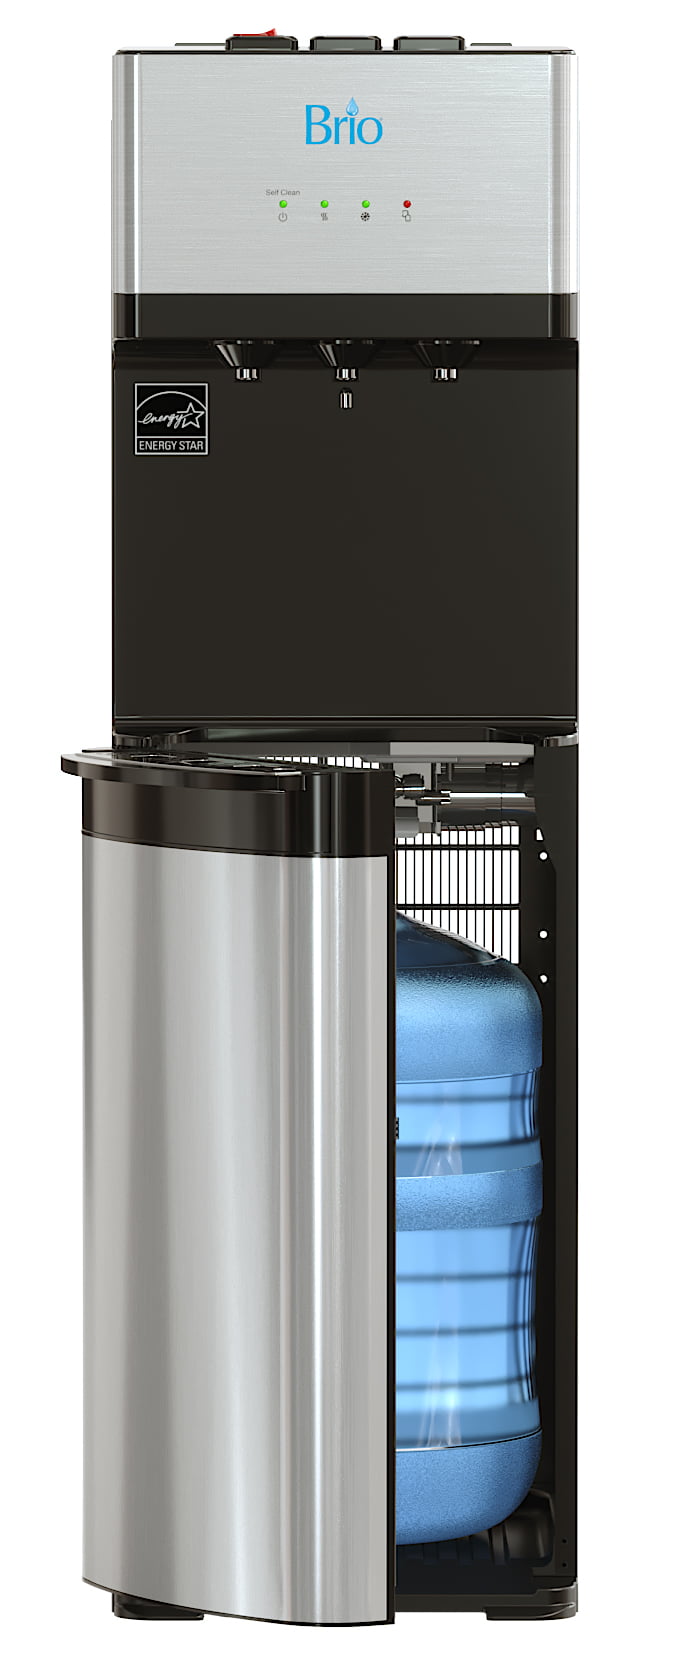 Cold /& Room Water Cooler Brio Moderna Self Cleaning Bottom Load Hot Tri Temp W//Touch Dispenser Feature NEW Black Stainless Steel